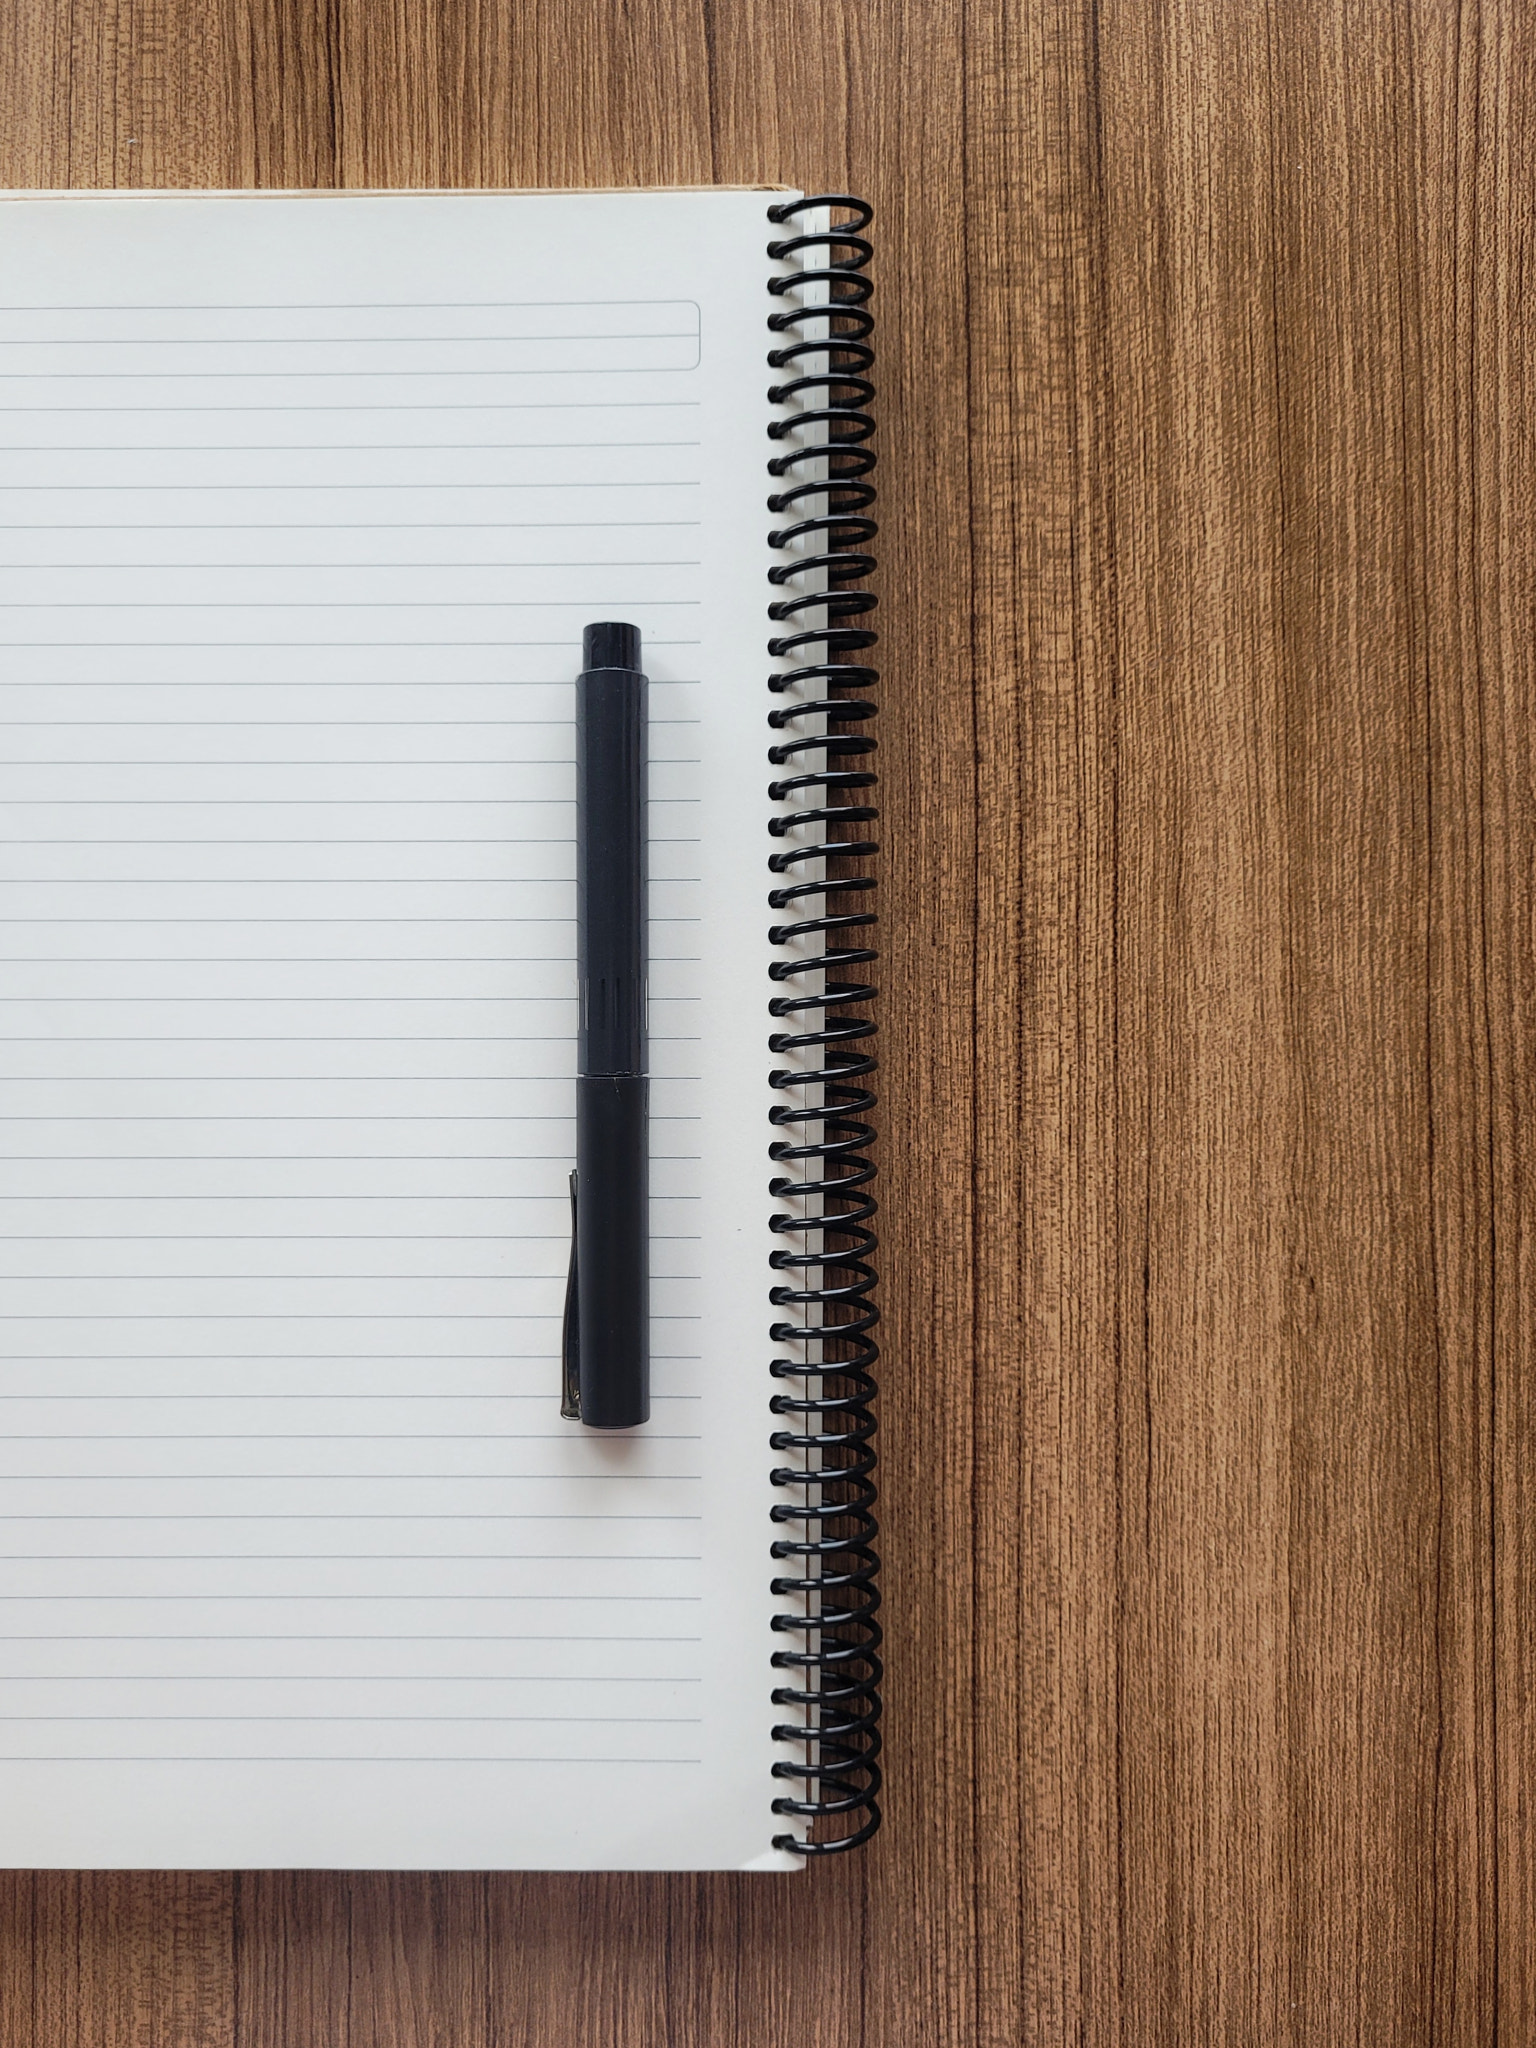 Directly above shot of spiral notebook with pen on wooden table